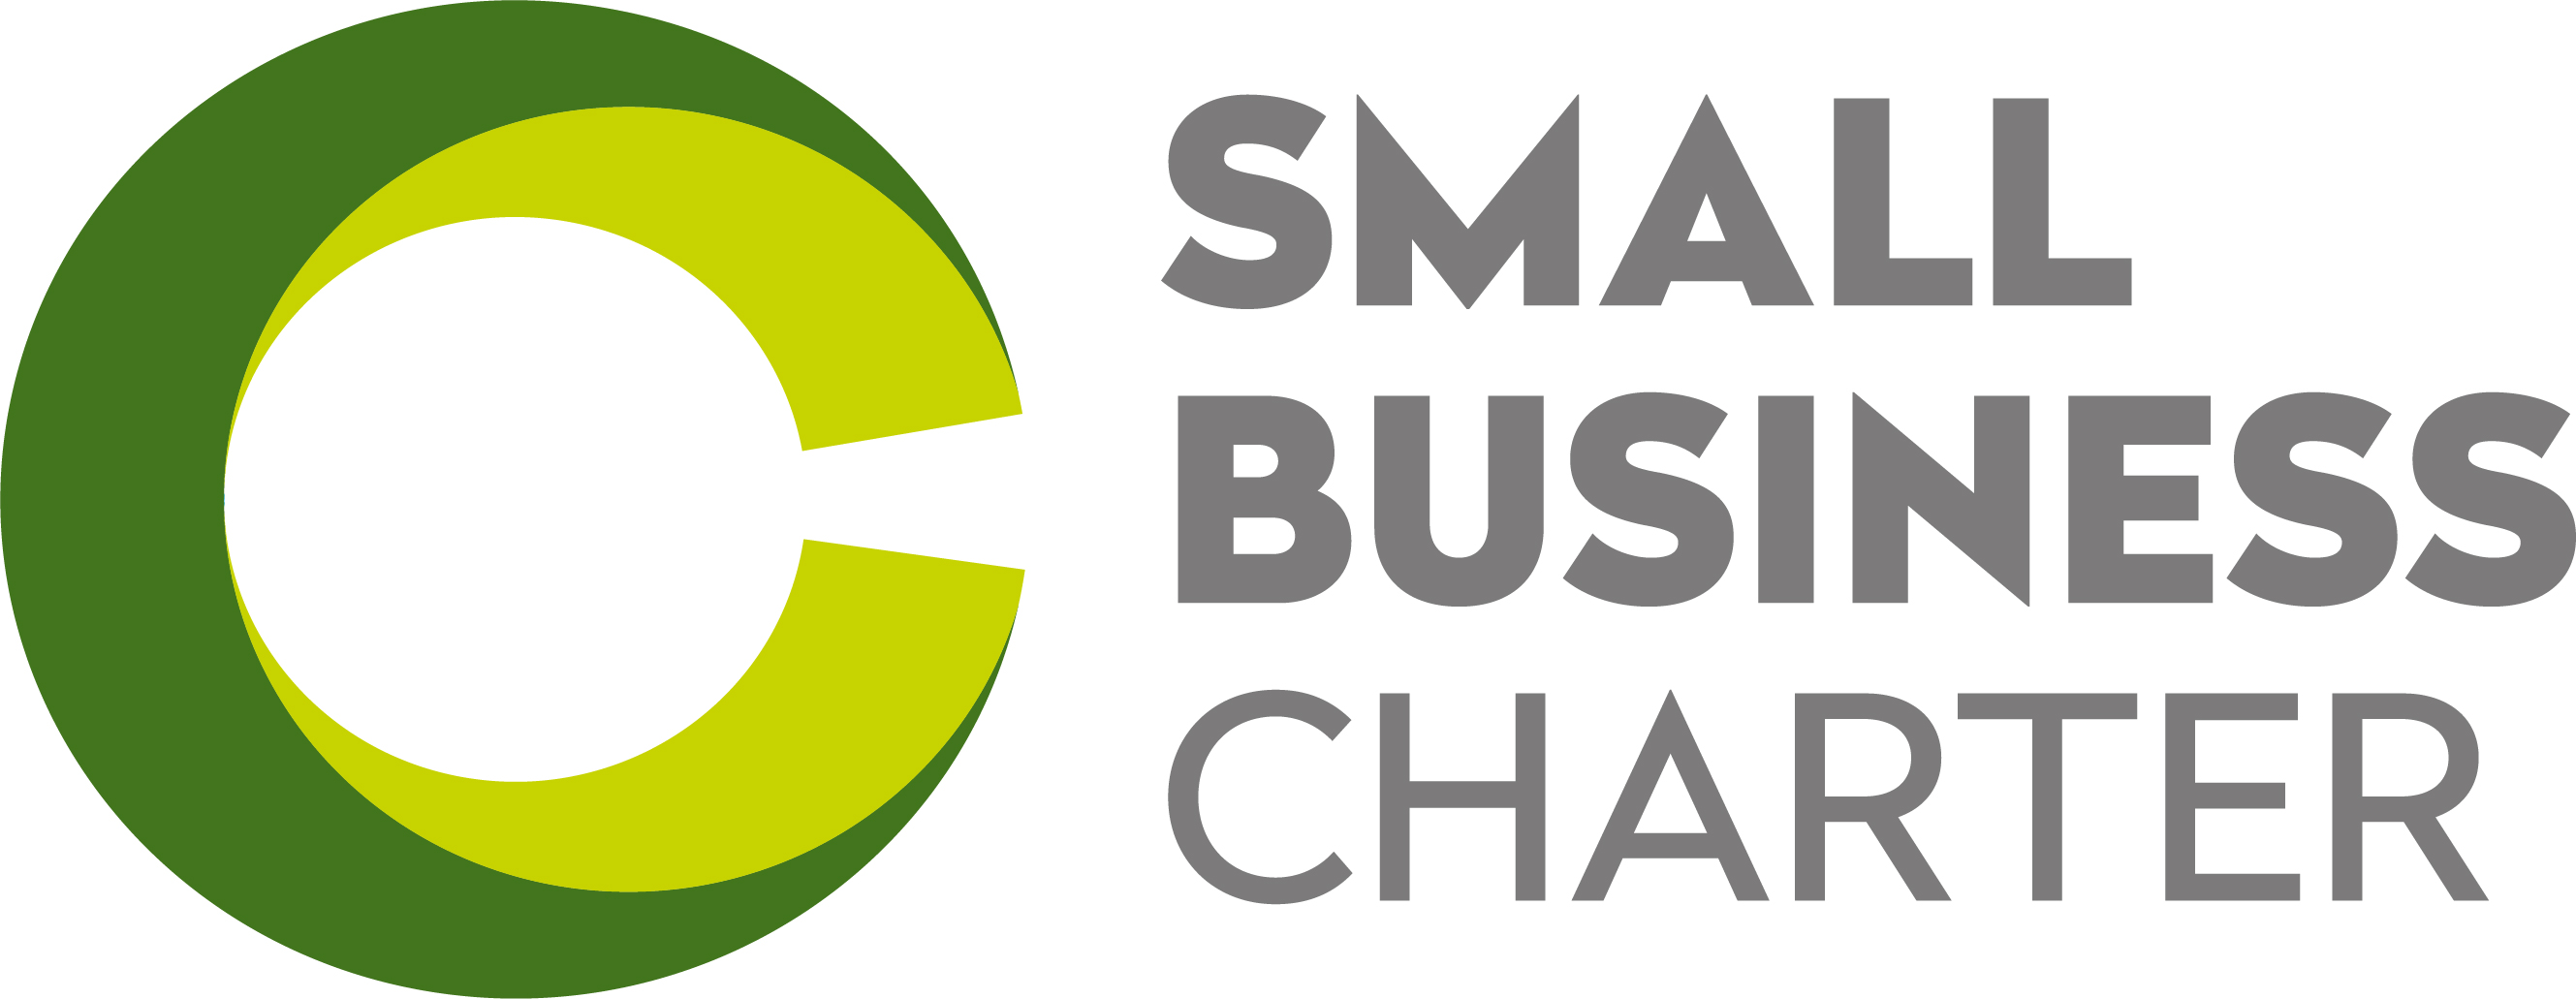 Logo and link for Small Business Charter 